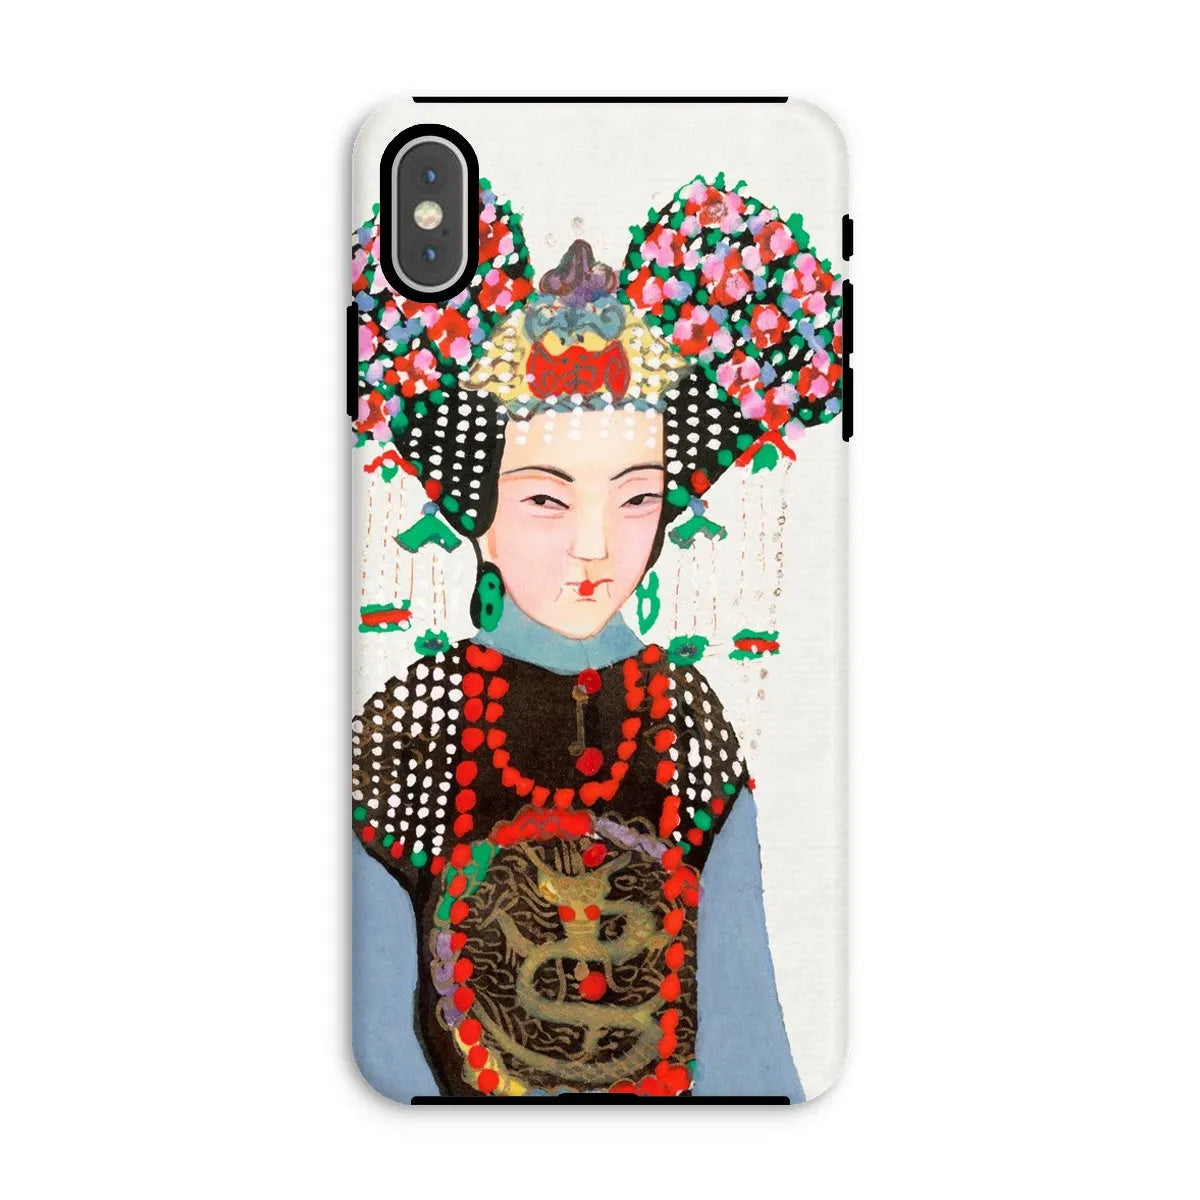 Chinese Empress - Manchu Art Phone Case - Iphone Xs Max / Matte - Mobile Phone Cases - Aesthetic Art